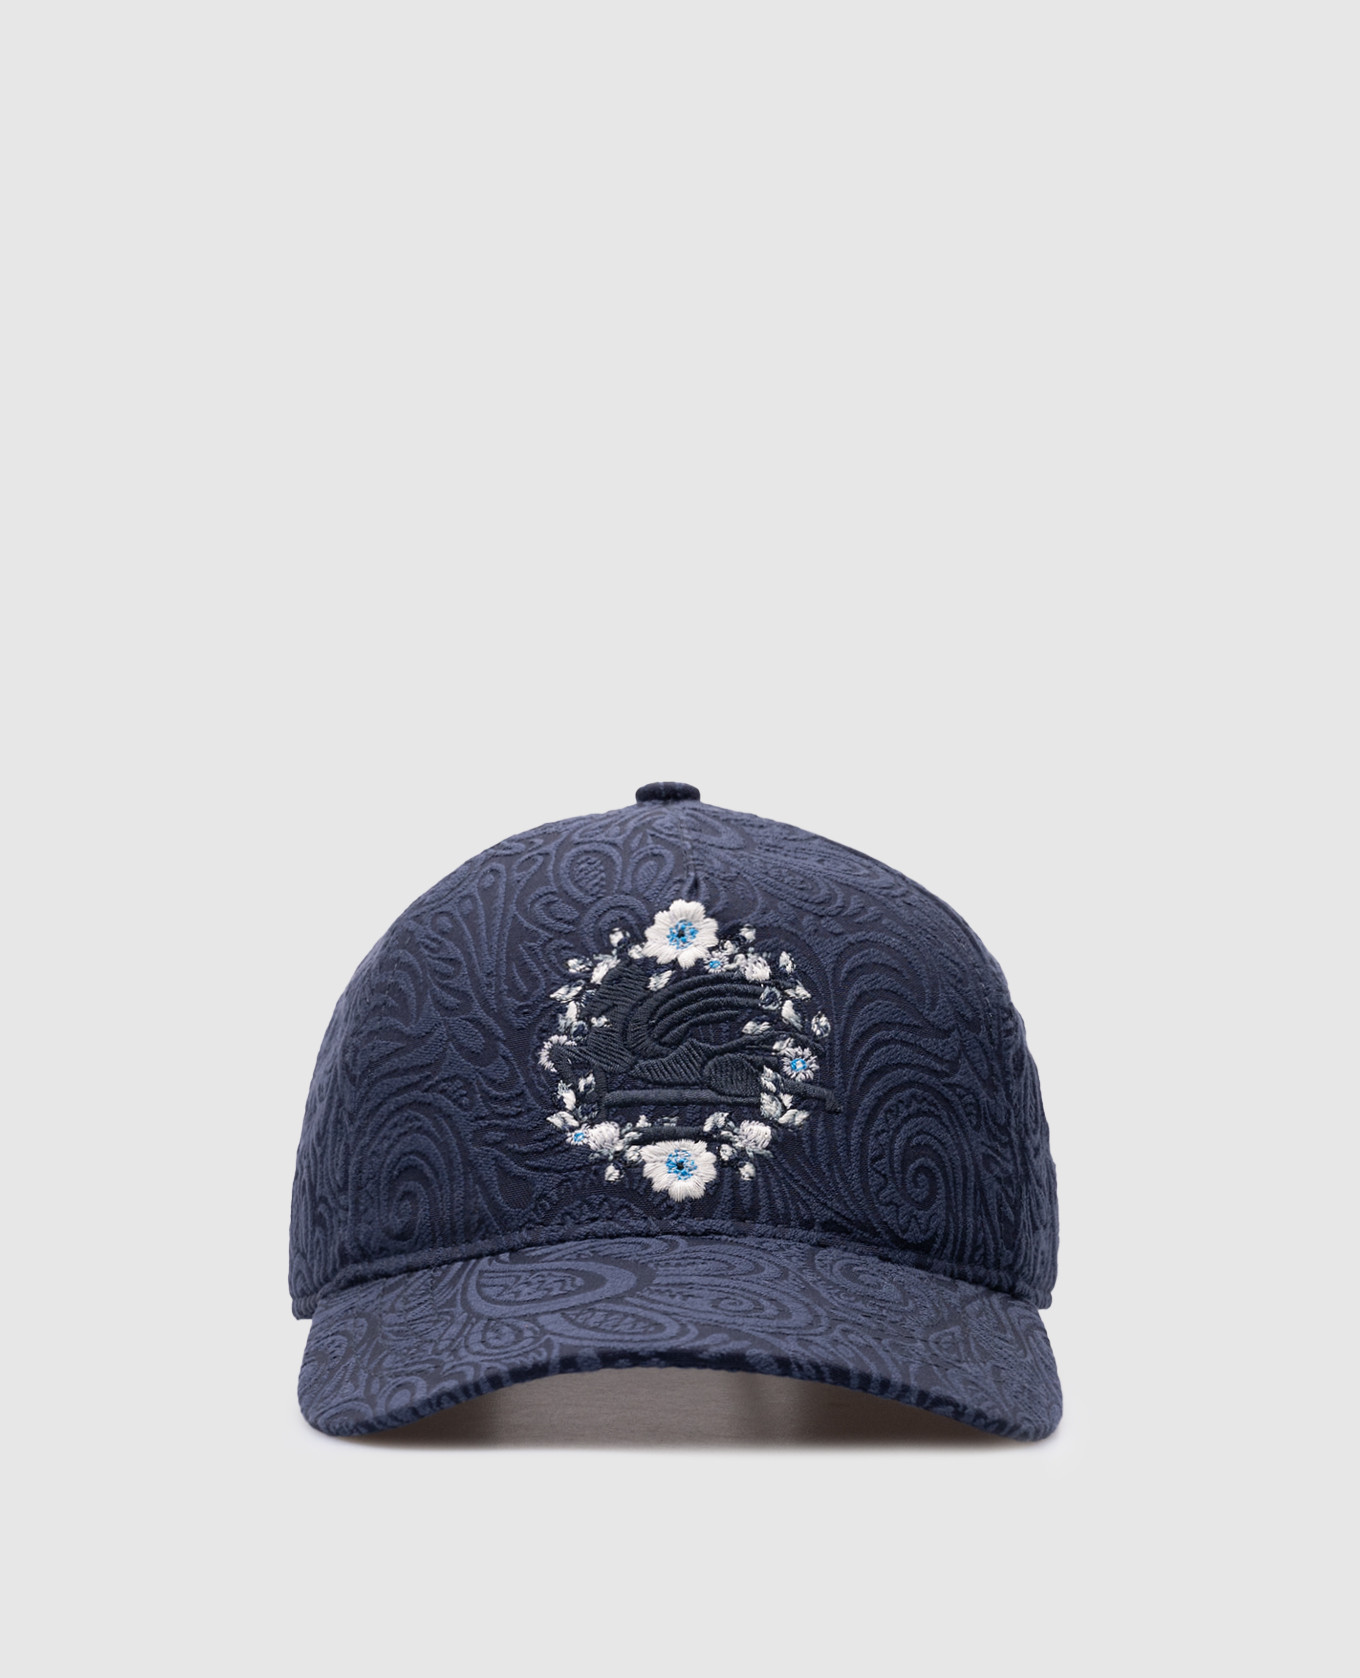 Blue paisley cap with floral logo embroidery